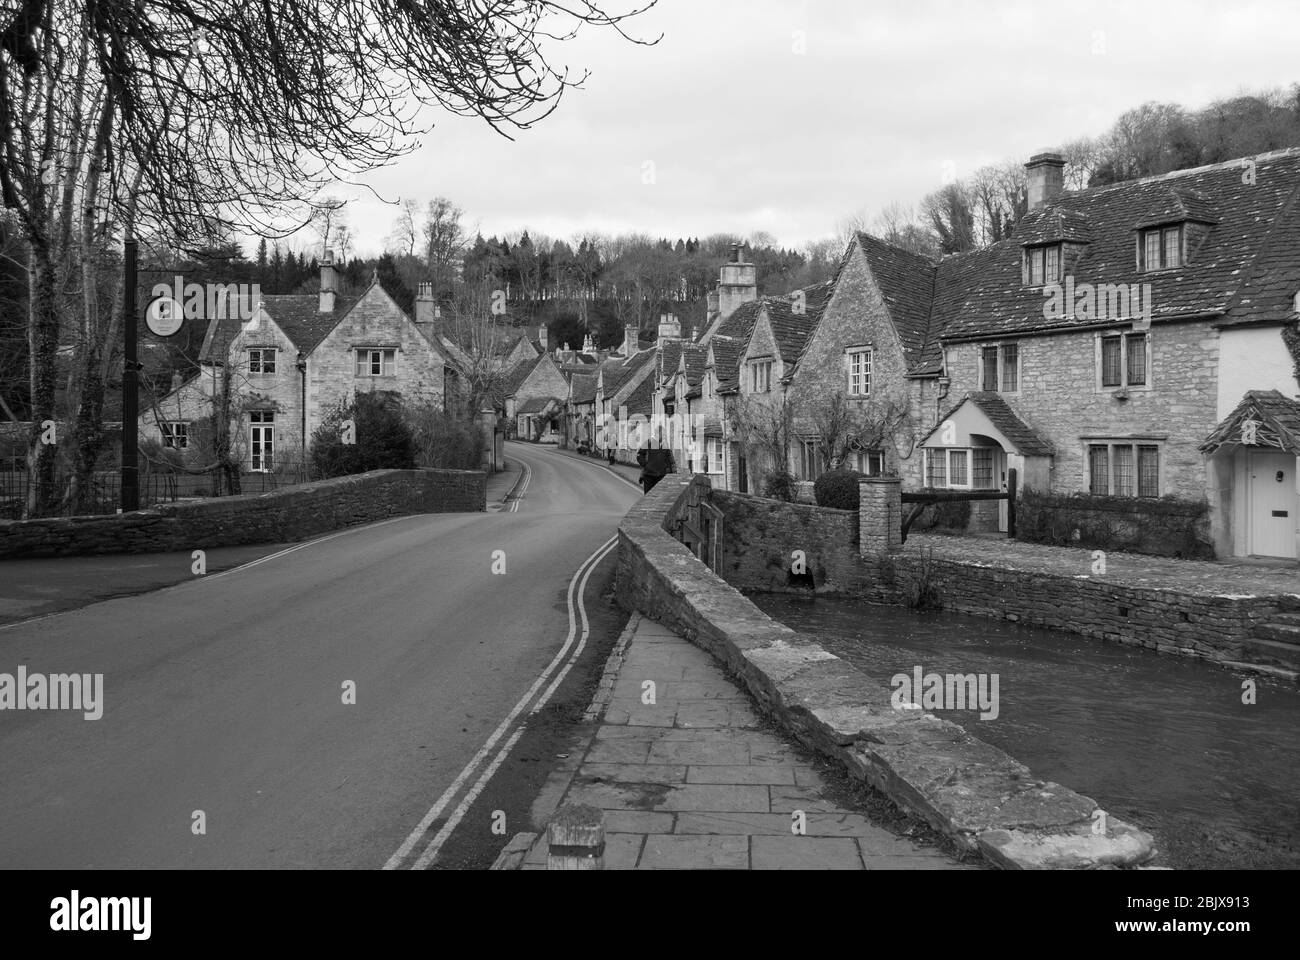 Cotswolds Cotswold Stone Heritage Conservation Architecture Heritage Old English Village Castle Combe Village, Chippenham SN14 Stock Photo